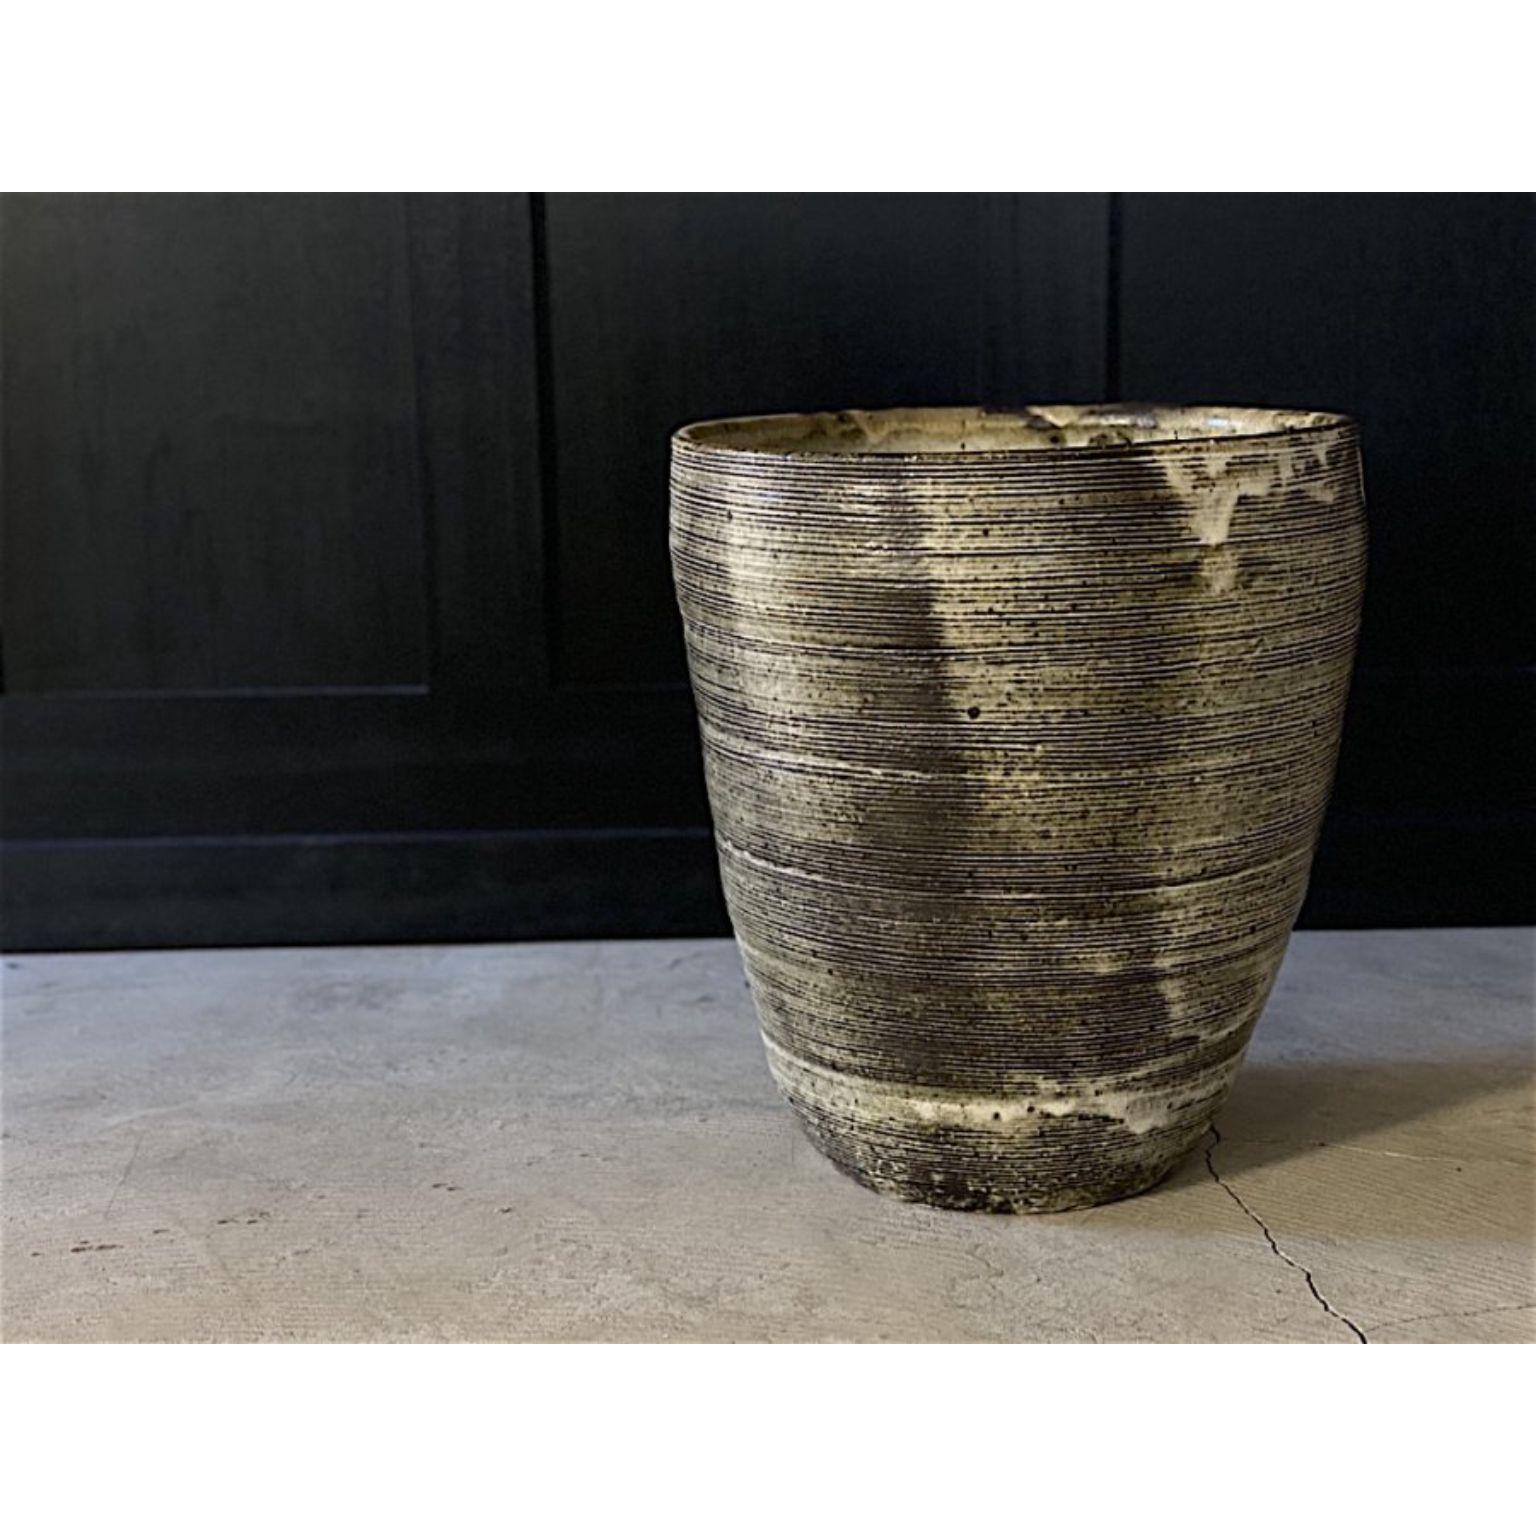 Post-Modern Handcrafted Vase #2 by Teppei Ono